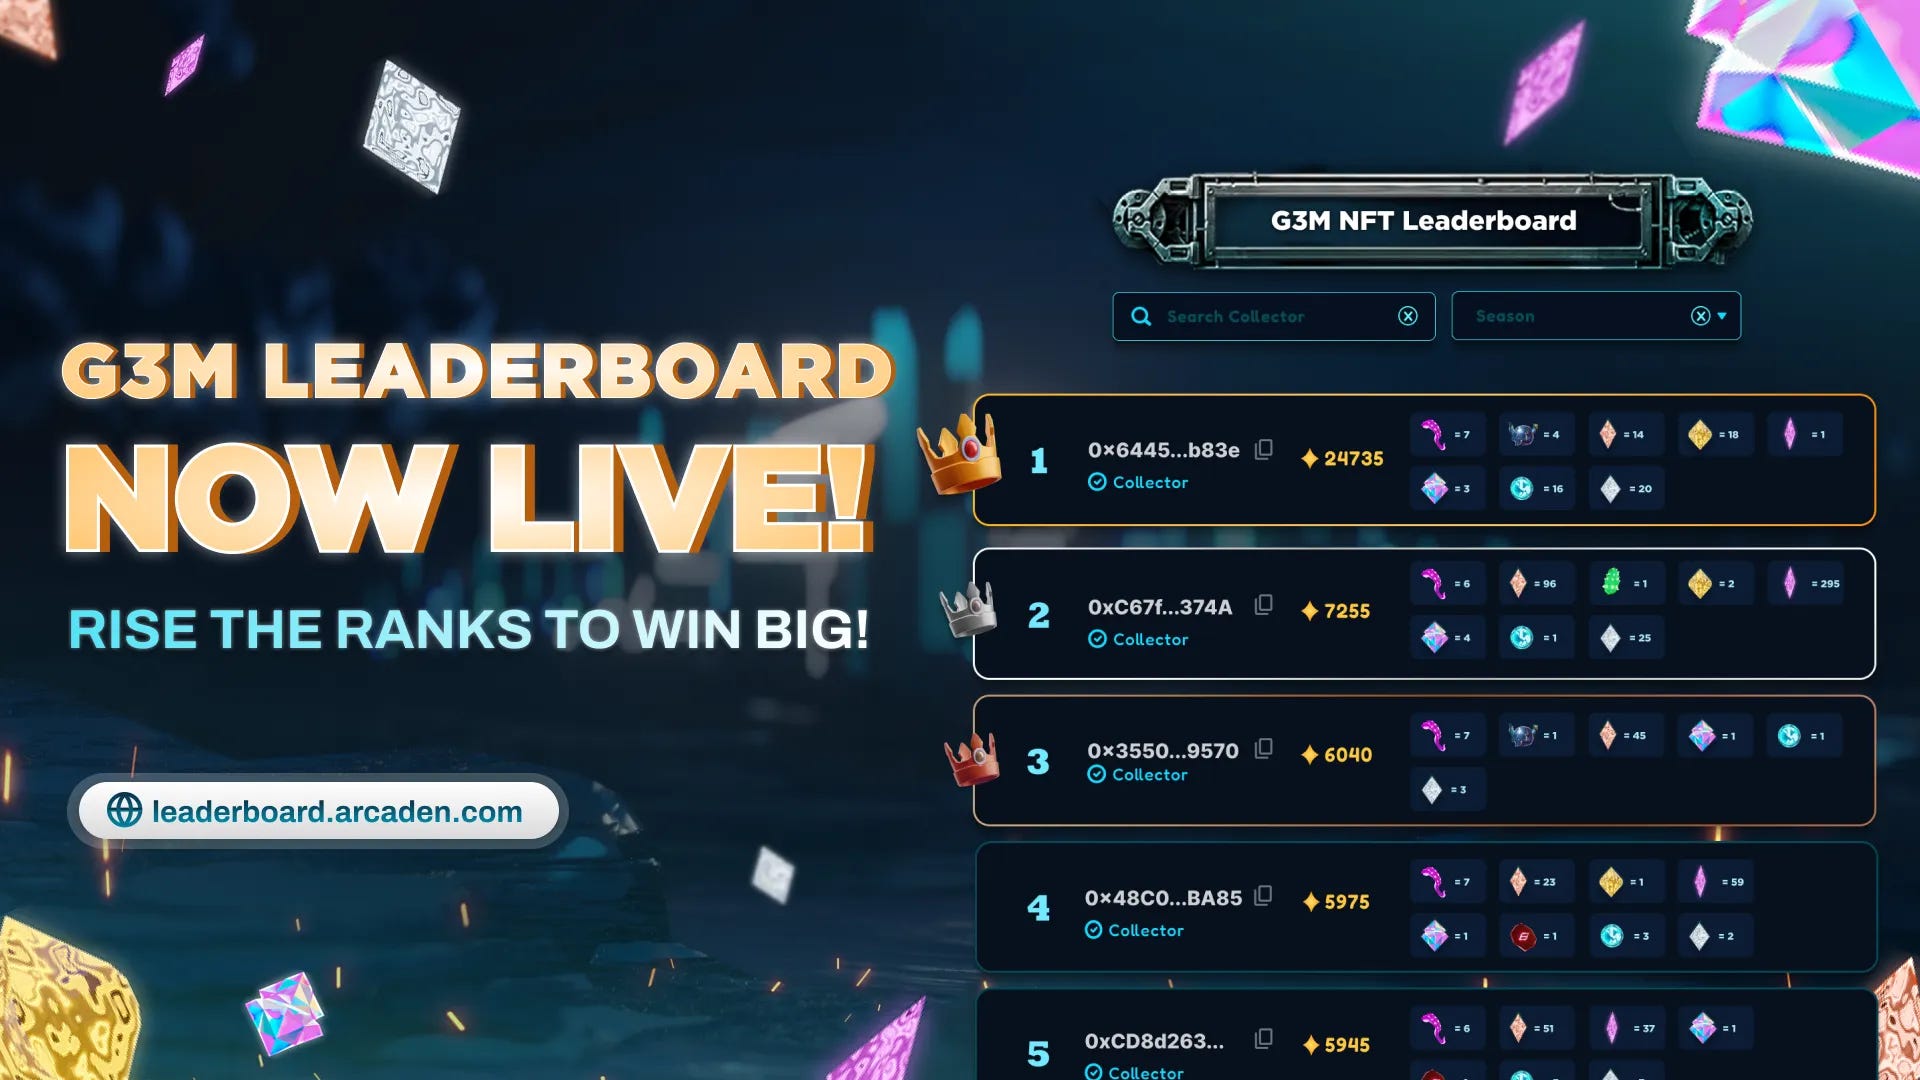 The G3M Leaderboard is Now LIVE - x2e by Felix Sim